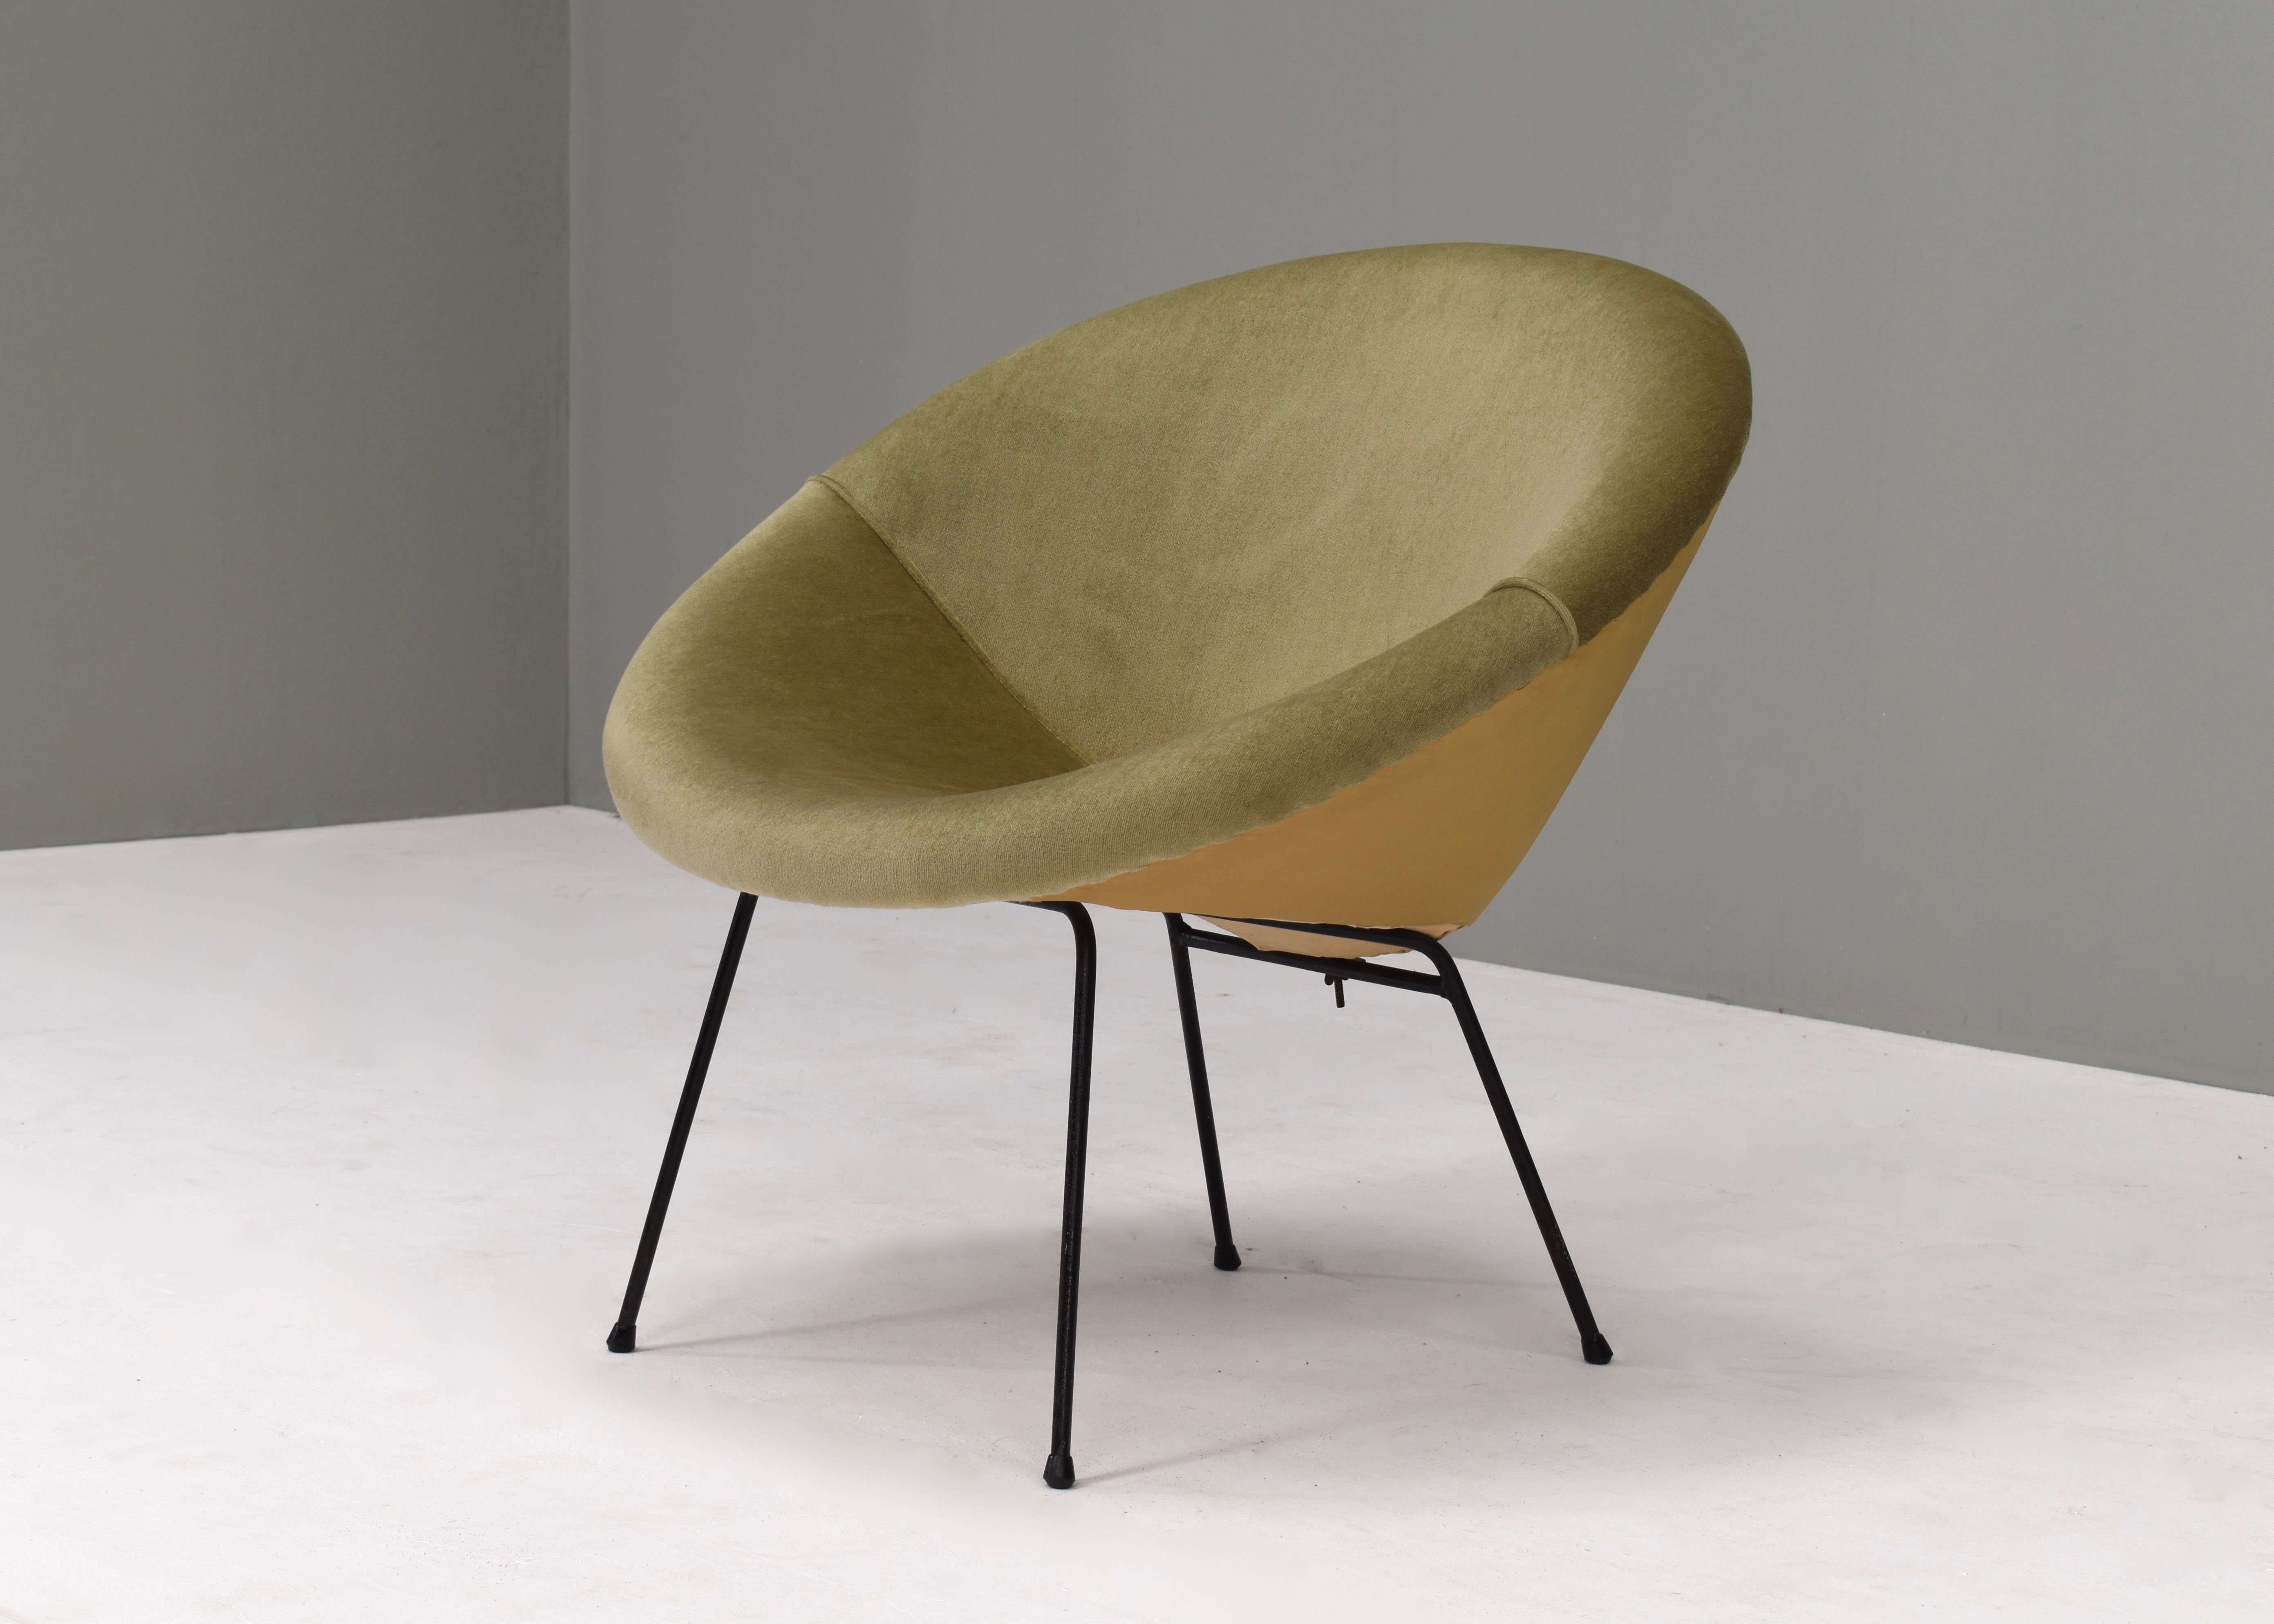 Mid-Century Modern Sculptural Circle Chair in Original Mohair Velvet and Black Metal Base, 1950's For Sale